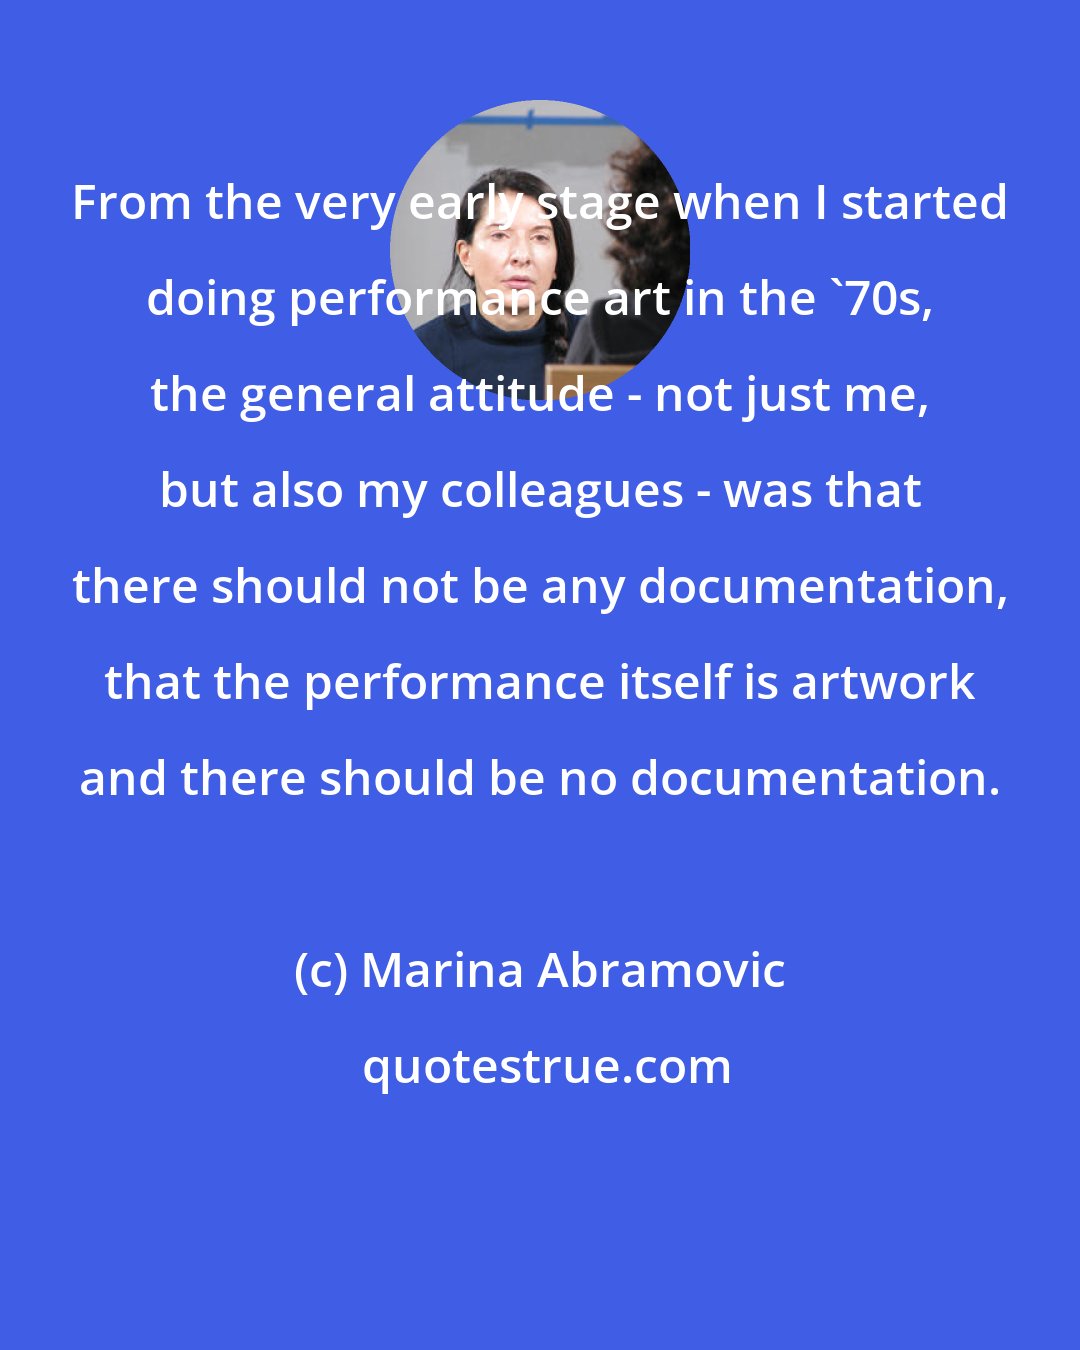 Marina Abramovic: From the very early stage when I started doing performance art in the '70s, the general attitude - not just me, but also my colleagues - was that there should not be any documentation, that the performance itself is artwork and there should be no documentation.